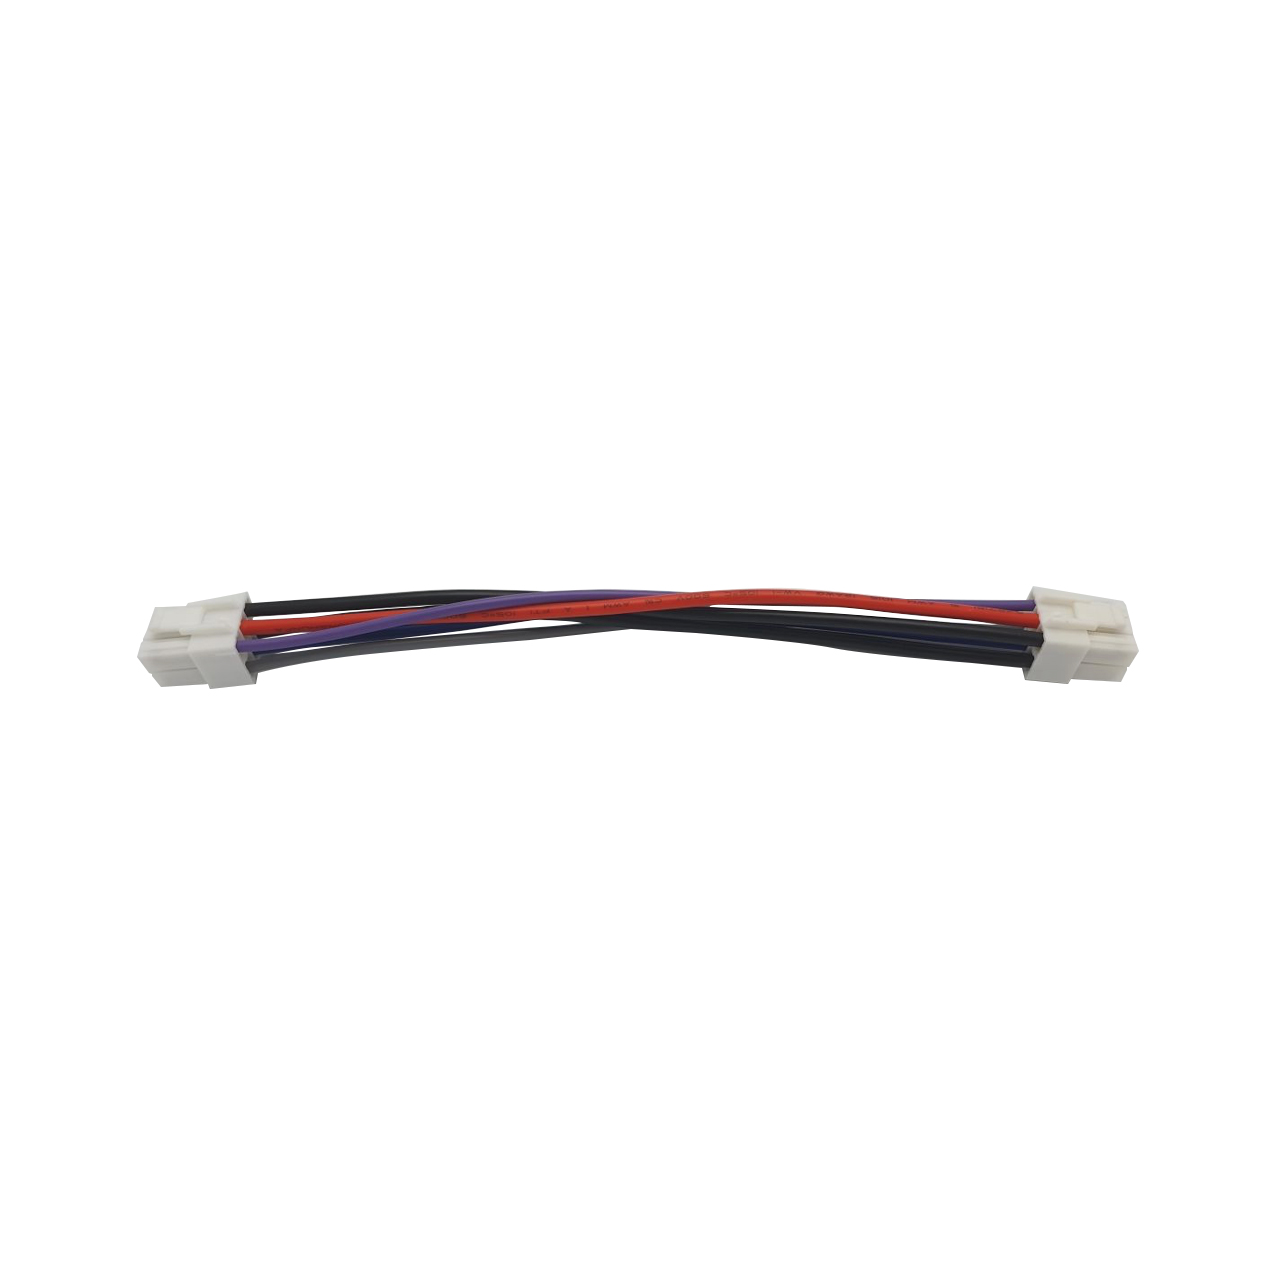 SMPS1200 to NC500 / 1200 / 2k cable